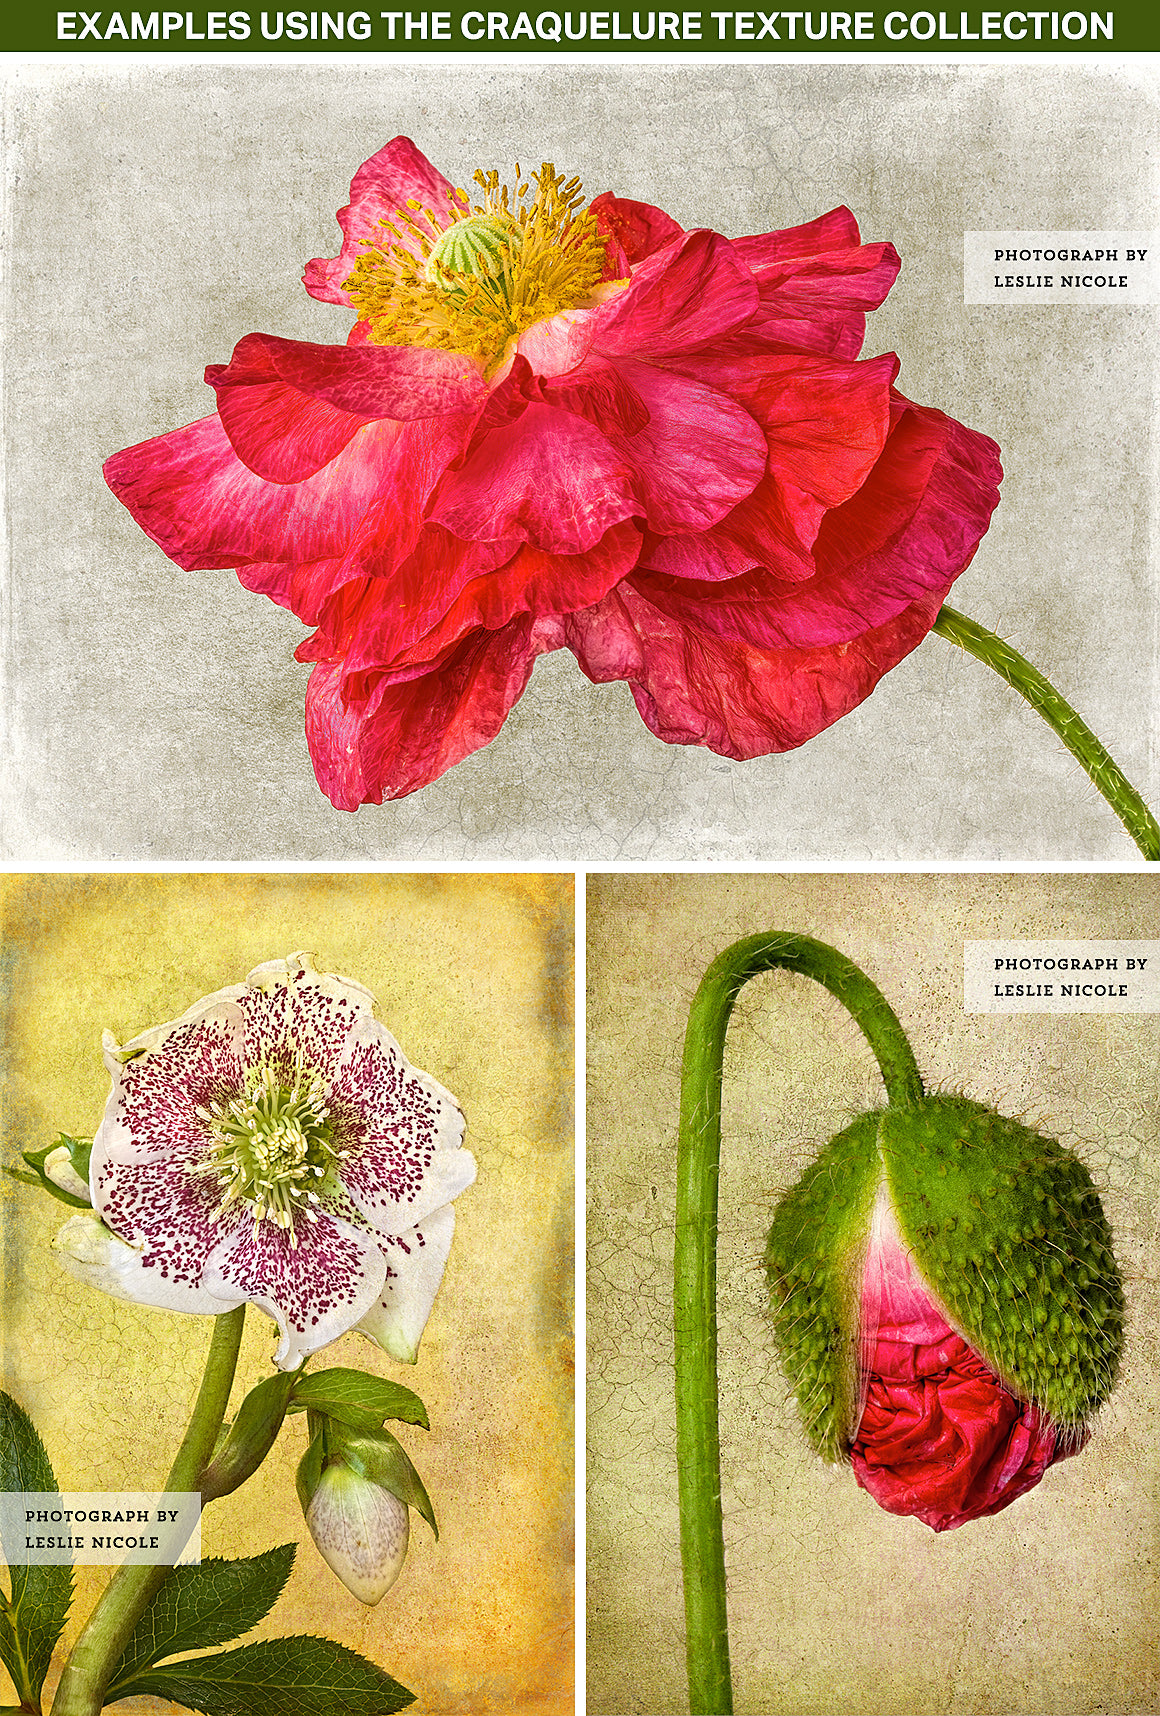 Textured flower photographs using the Craquelure texture collection.